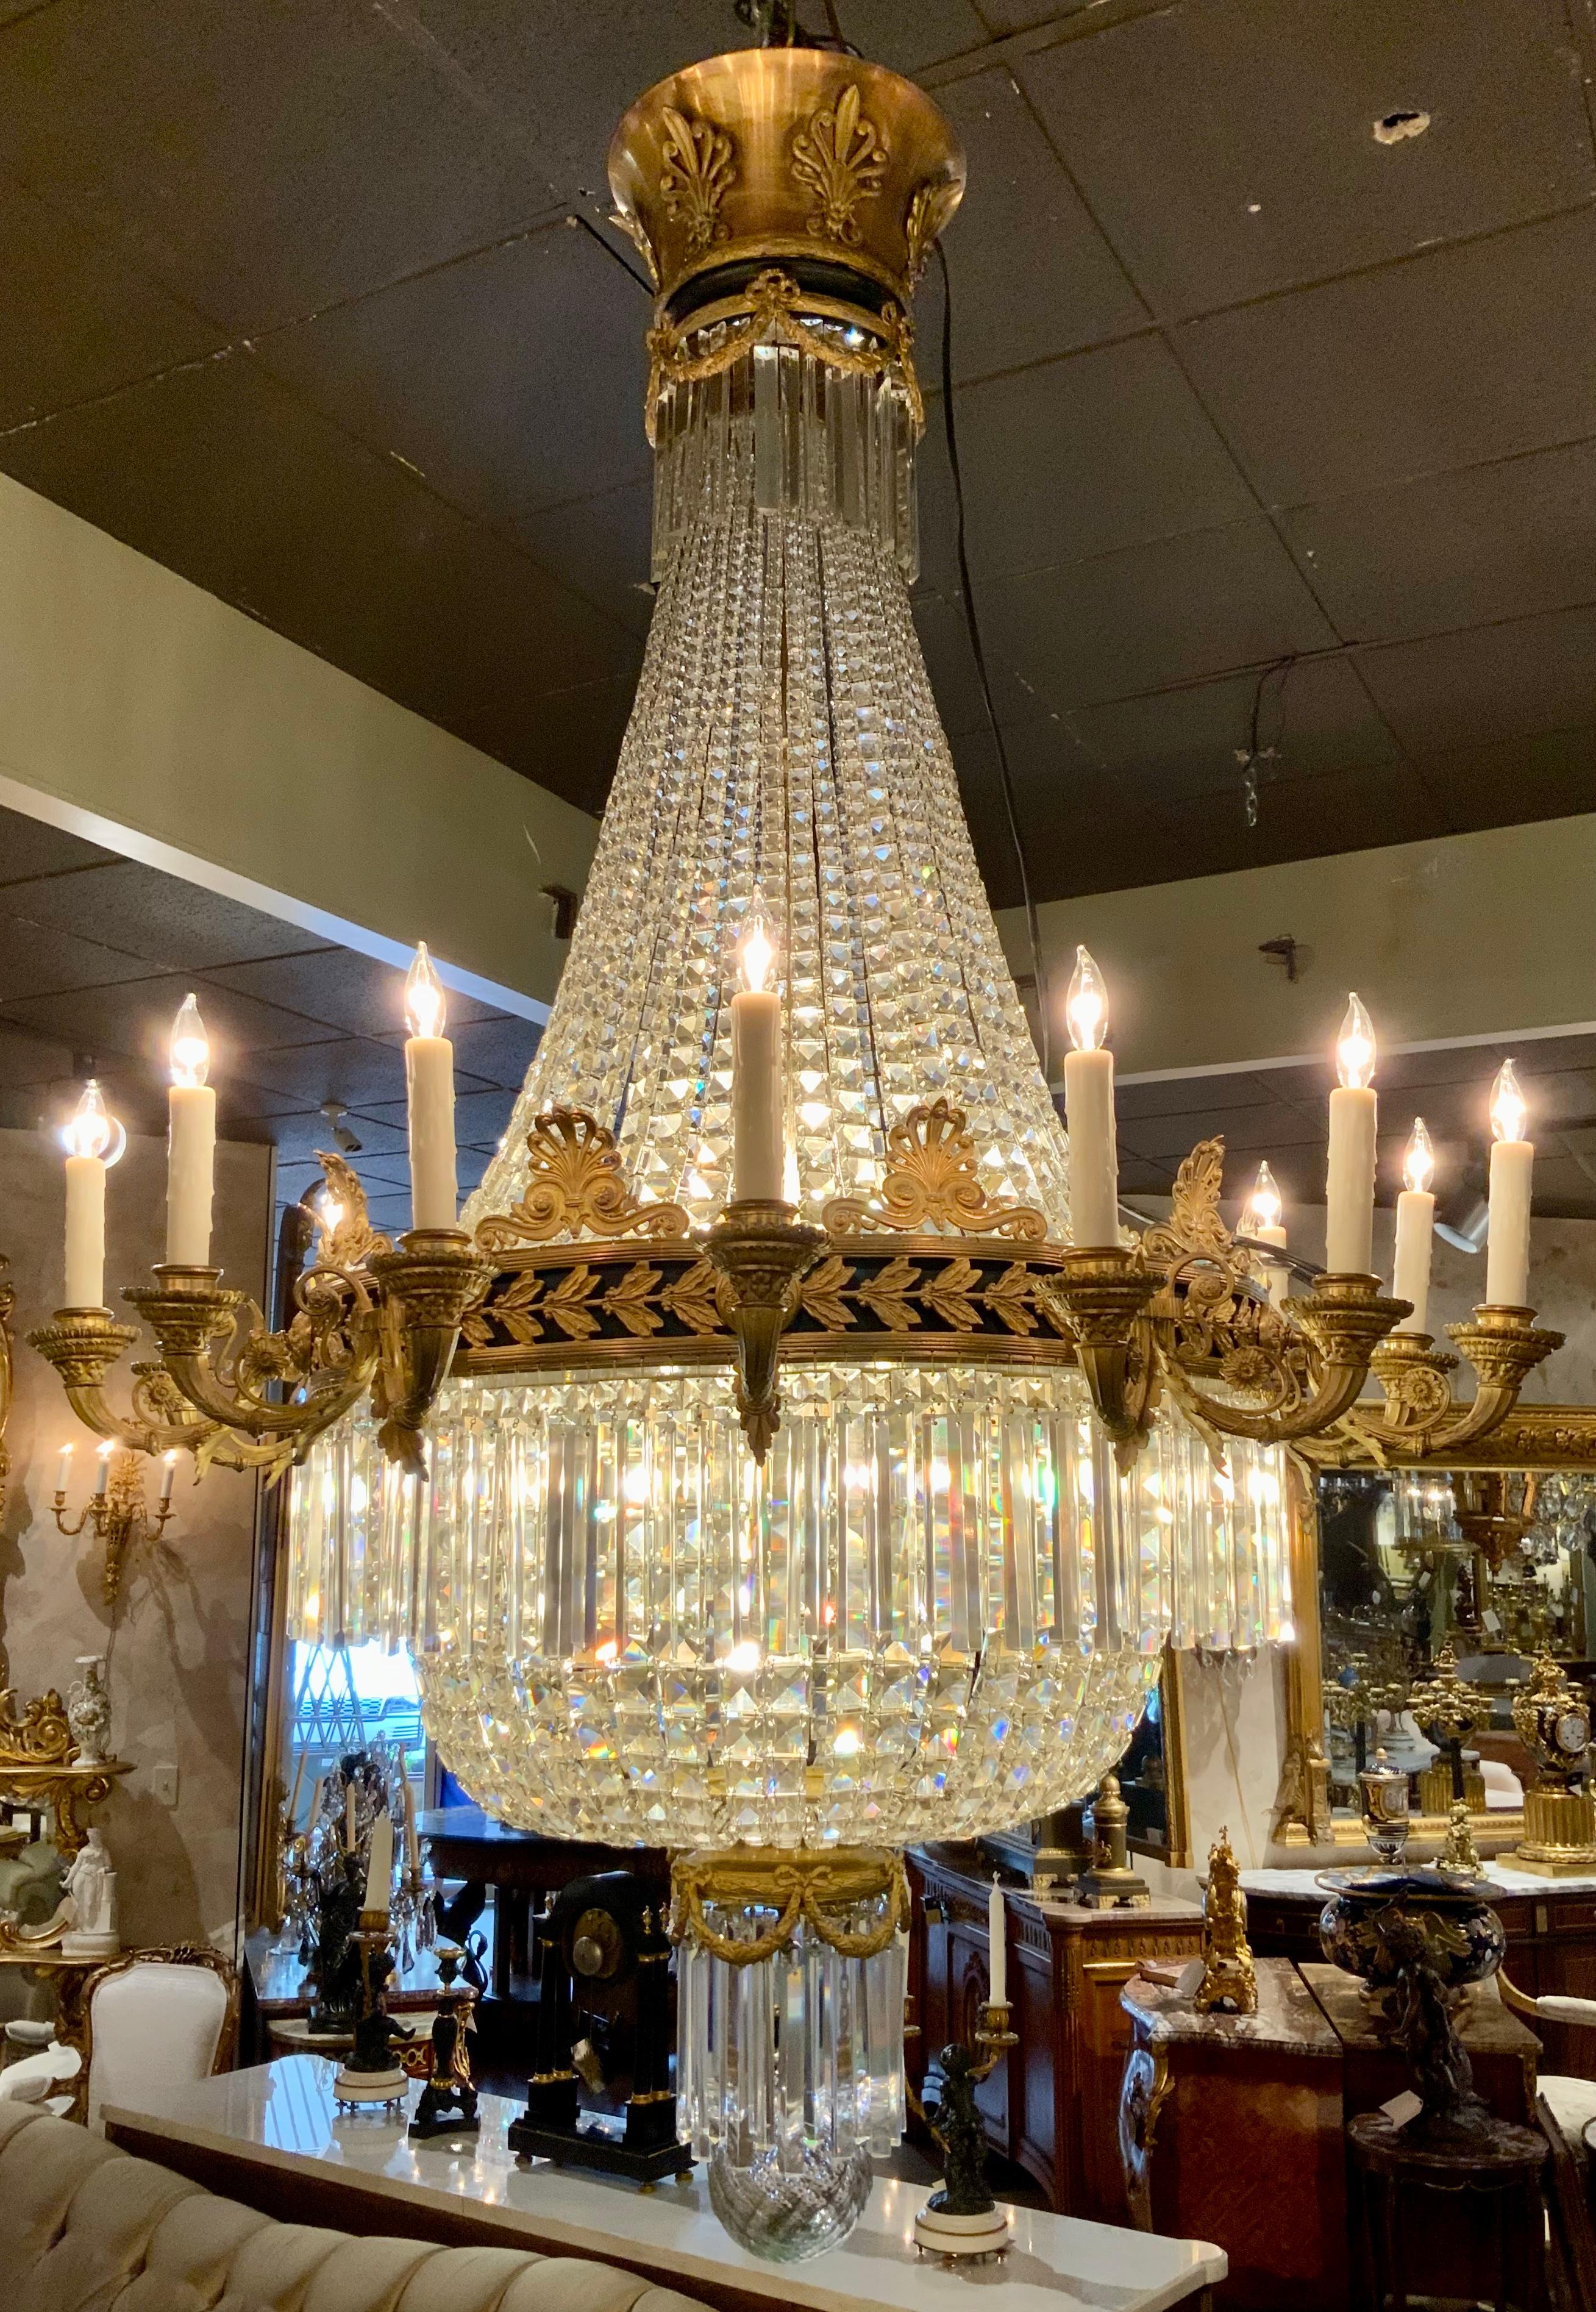 This Empire style chandelier is very large with twenty two
Lights. It has fifteen exterior lights and twelve lights inside
The basket shape. It has a circular bronze dore frame mounted
Against a black inside rim. A handsome leaf and berry